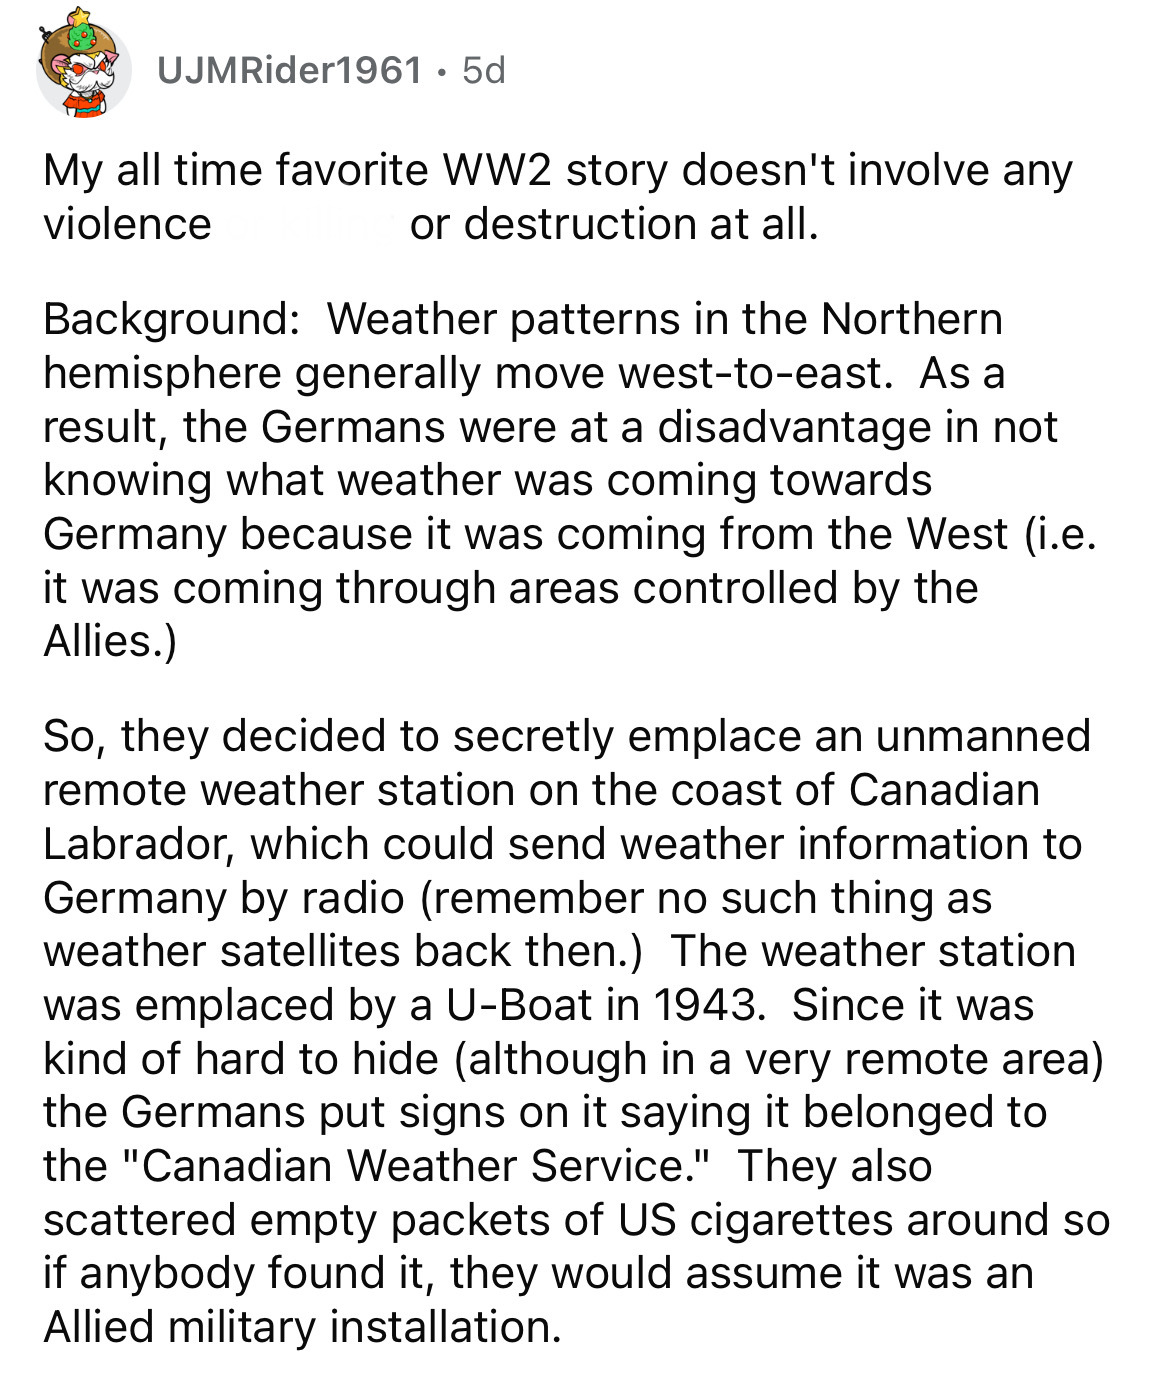 document - UJMRider1961 5d My all time favorite WW2 story doesn't involve any violence or destruction at all. Background Weather patterns in the Northern hemisphere generally move westtoeast. As a result, the Germans were at a disadvantage in not knowing 